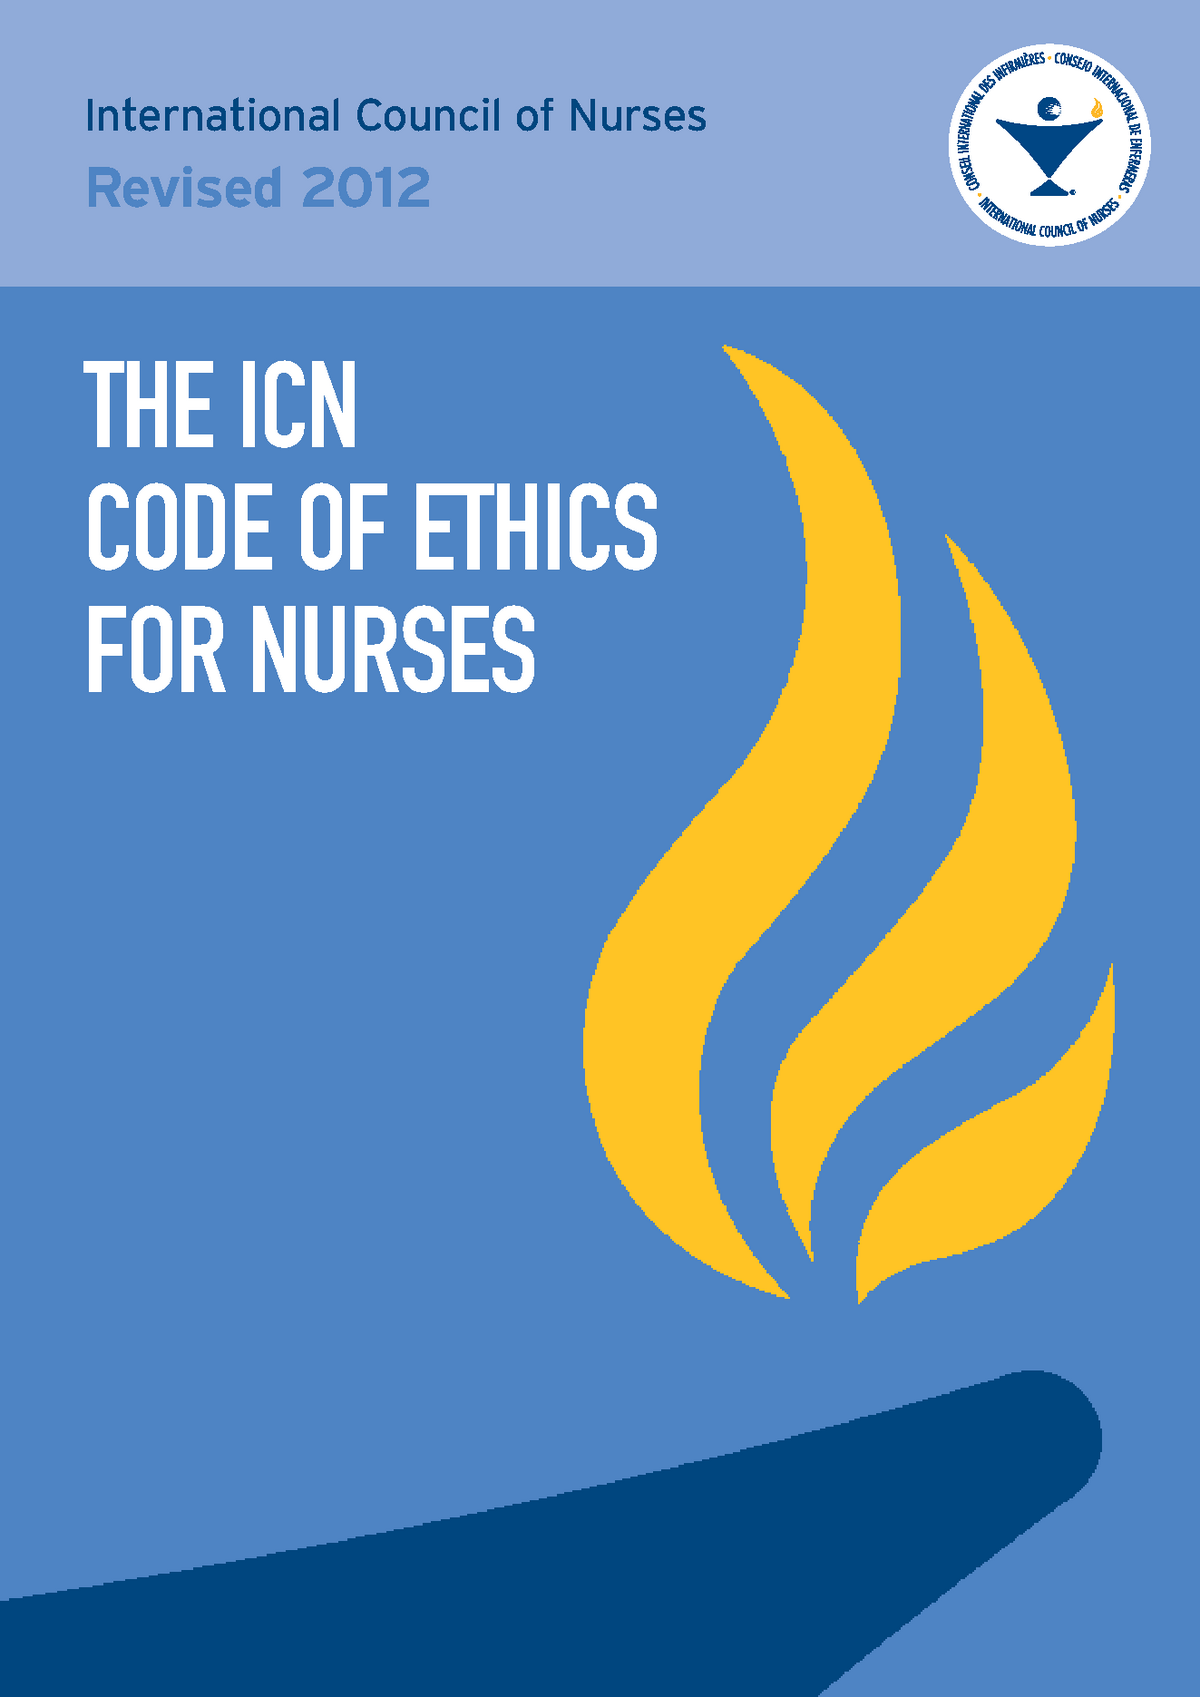 International Council of Nurses Code of Ethics for Nurses - THE ICN CODE .....